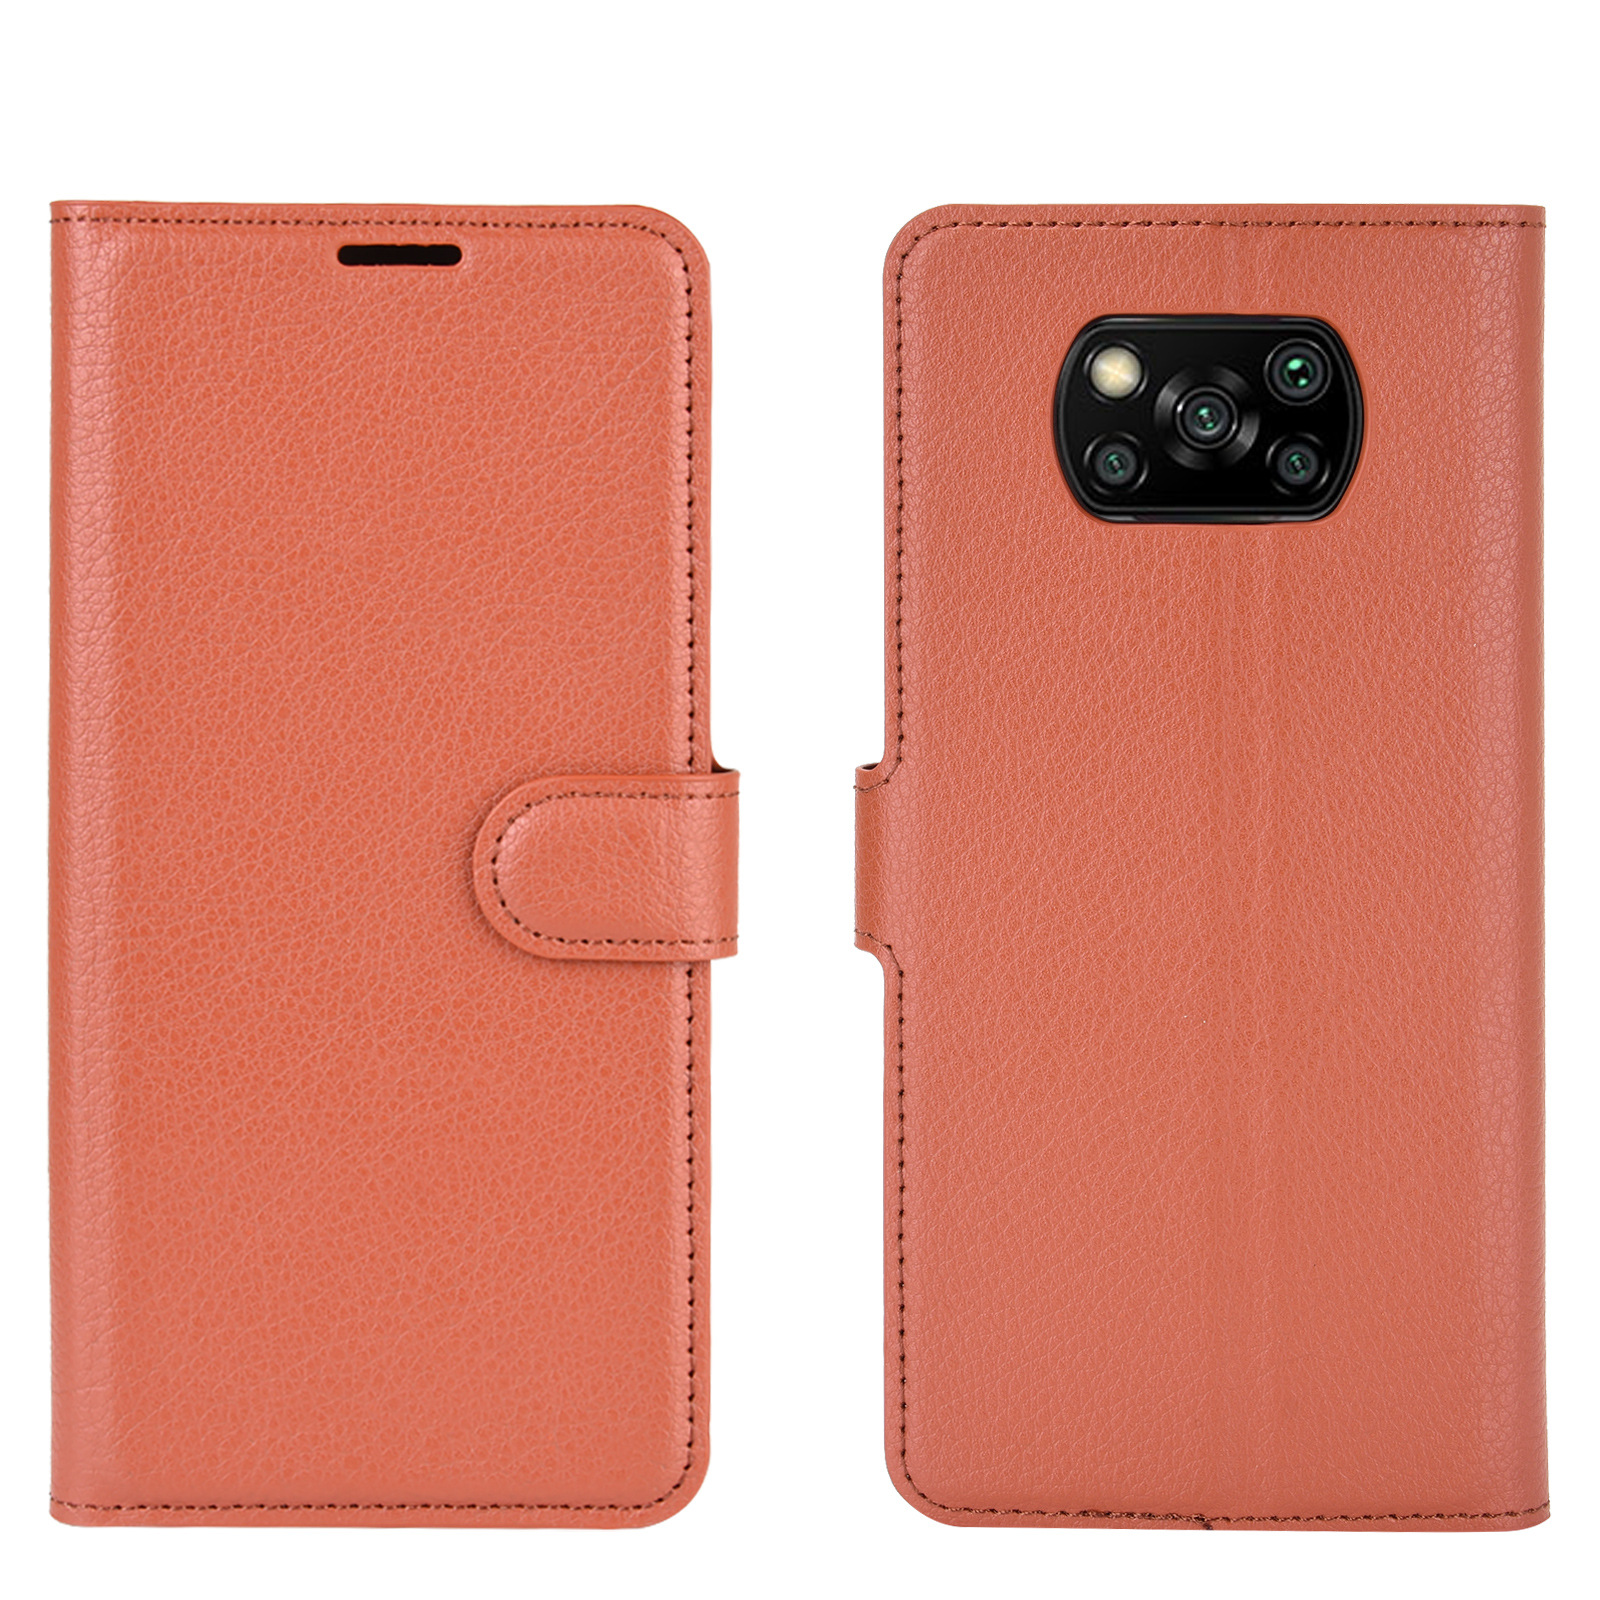 Bakeey-for-POCO-X3-PRO--POCO-X3-NFC-Case-Litchi-Pattern-Flip-Shockproof-PU-Leather-Full-Body-Protect-1847324-7